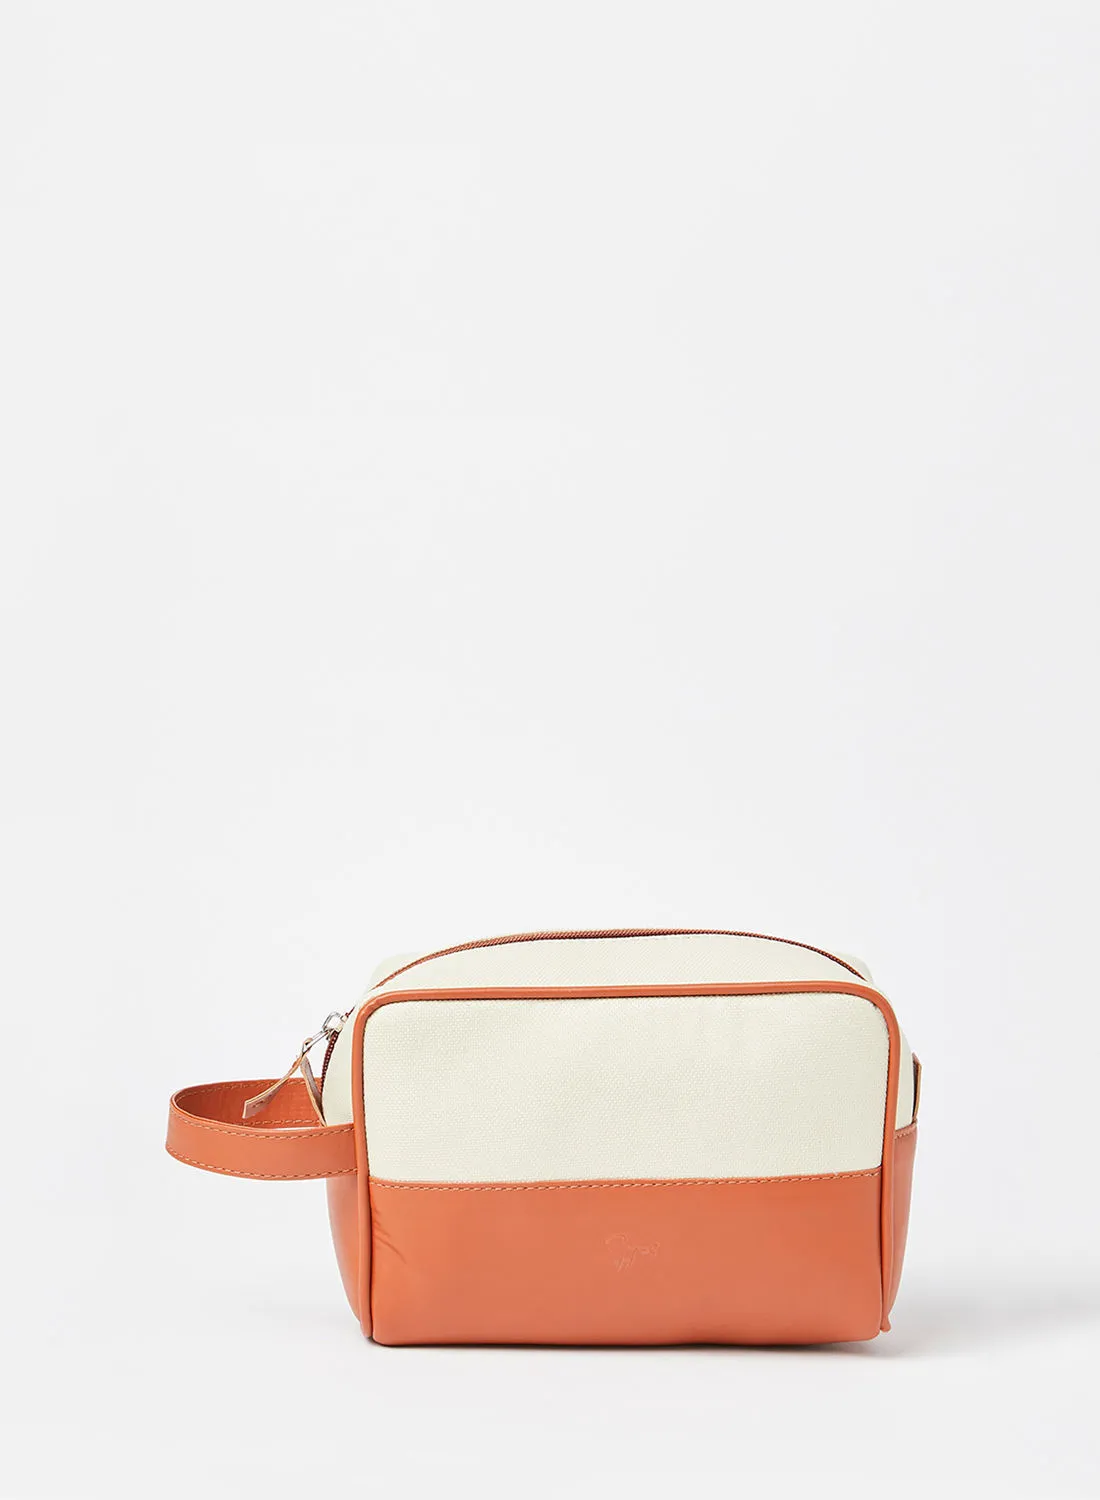 STATE 8 Colorblock Washbag Brown/Off White